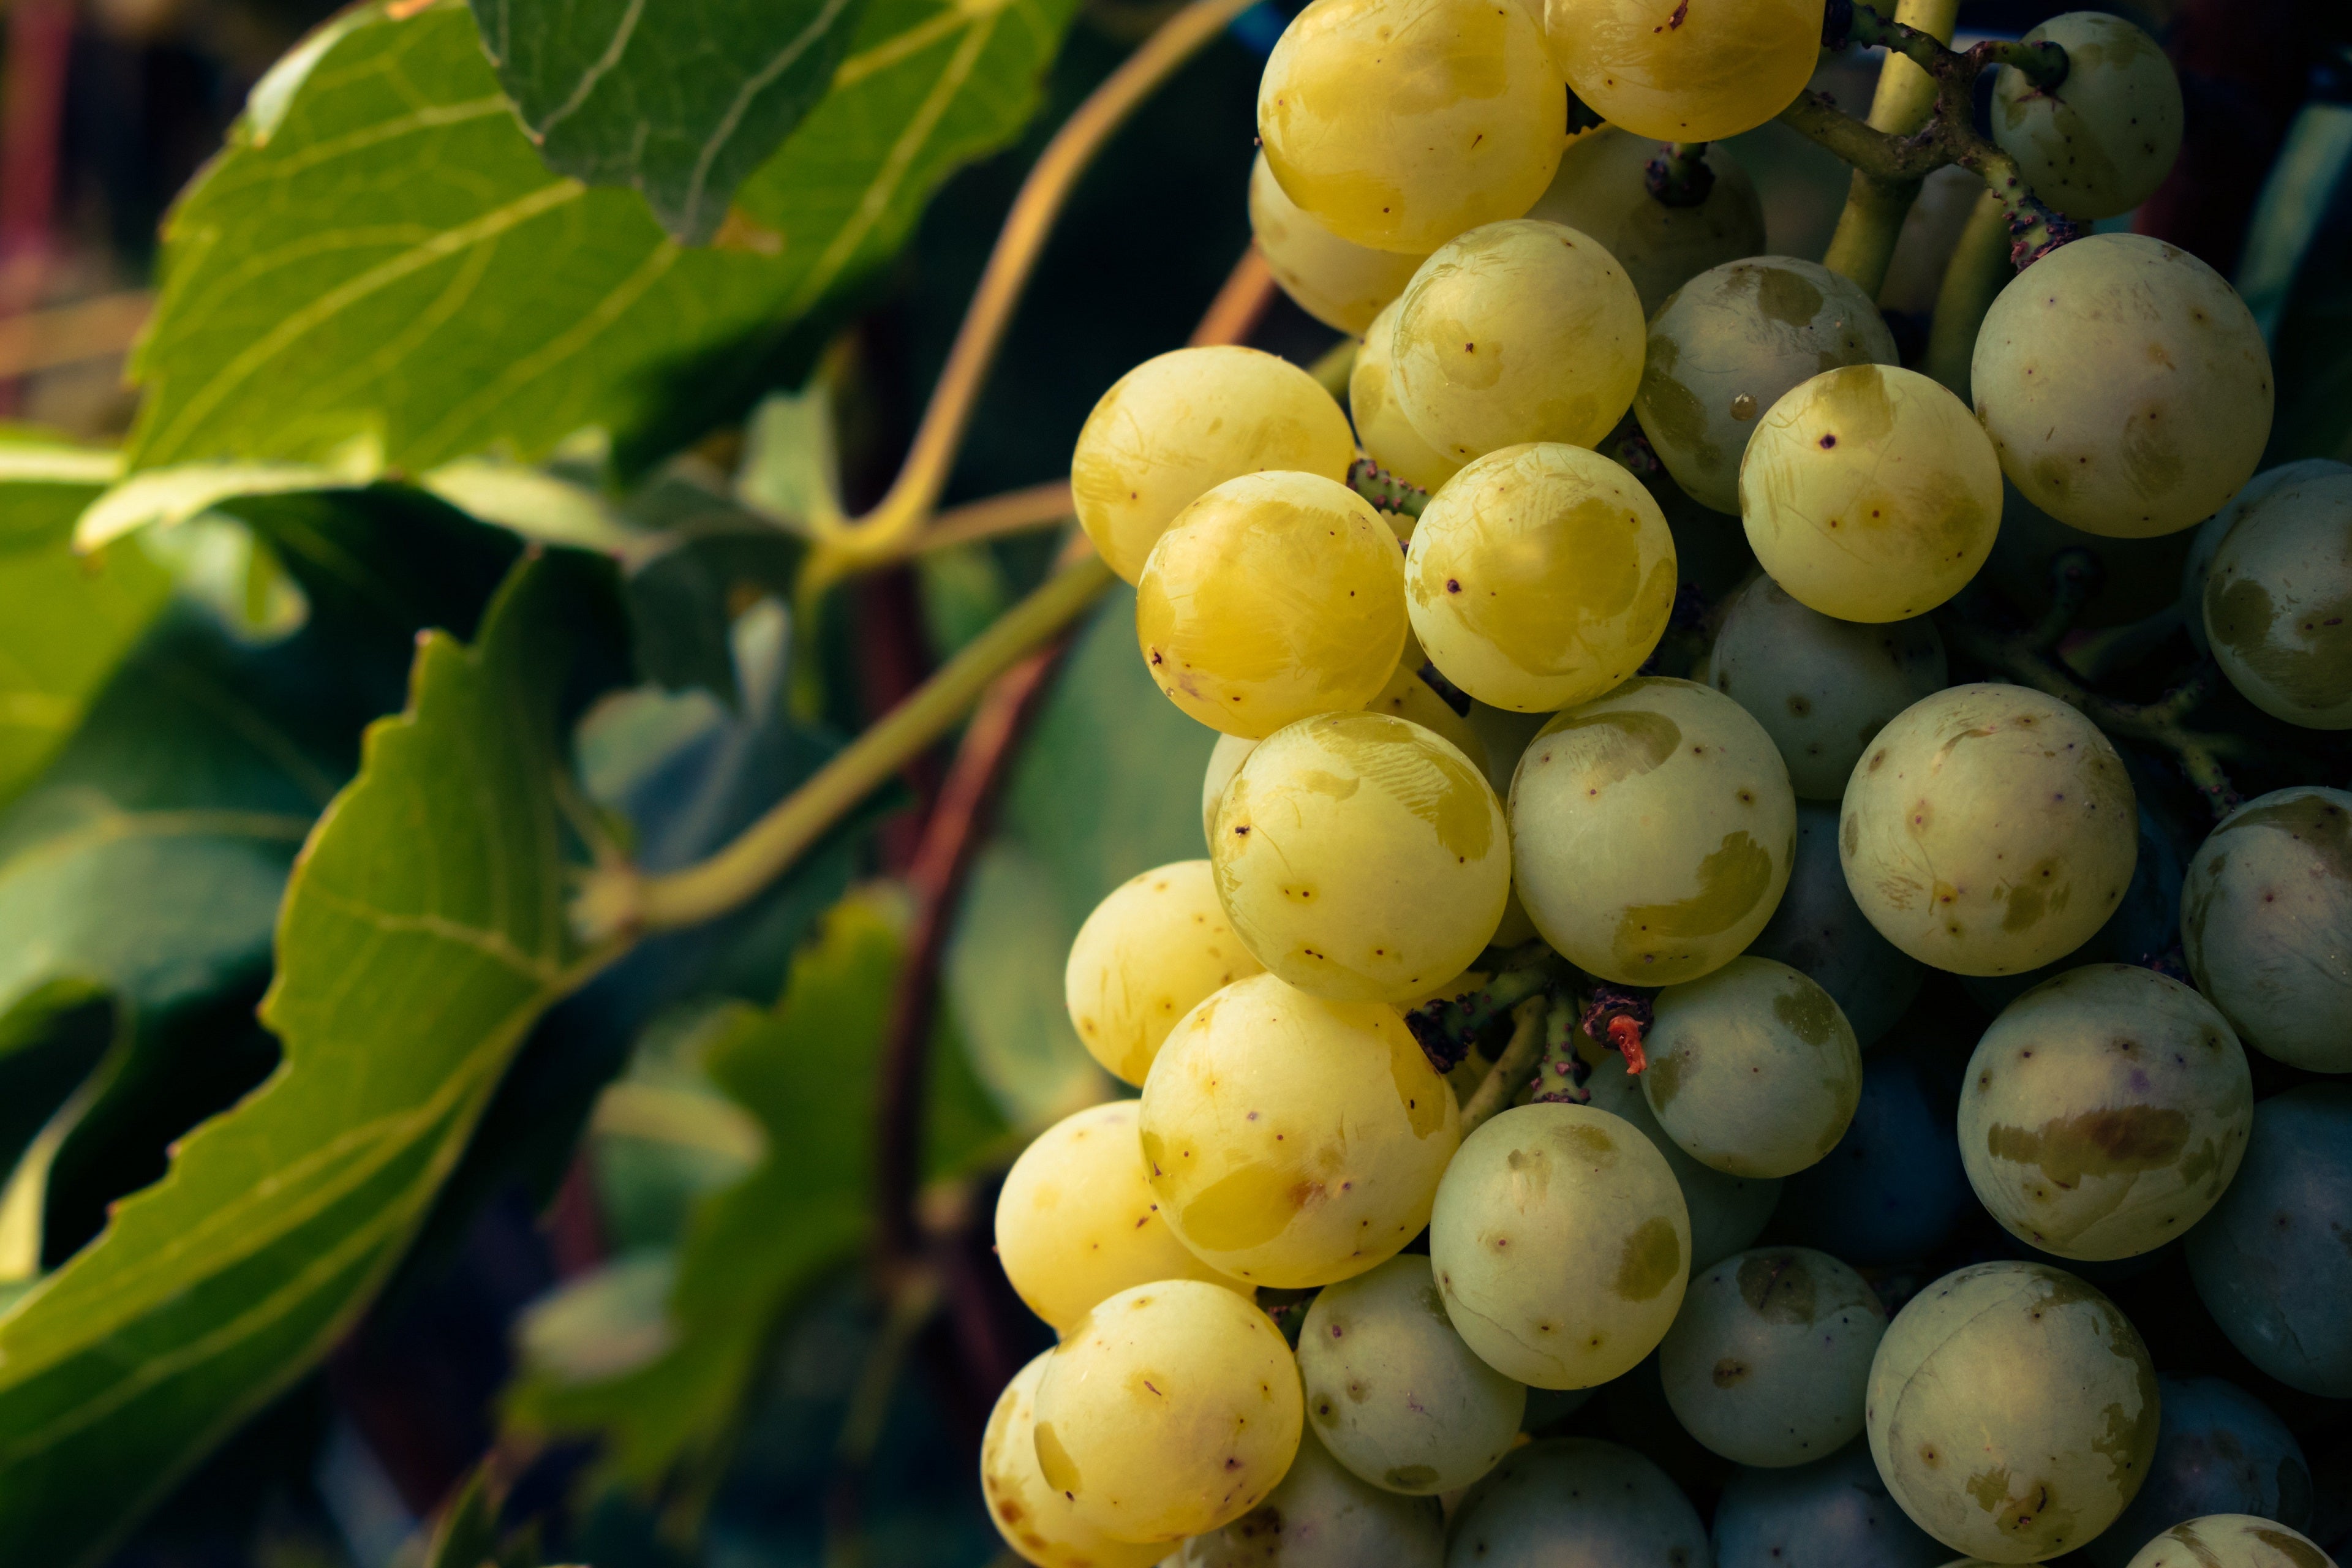 How Many Grapes Does It Take To Make A Bottle Of Wine?